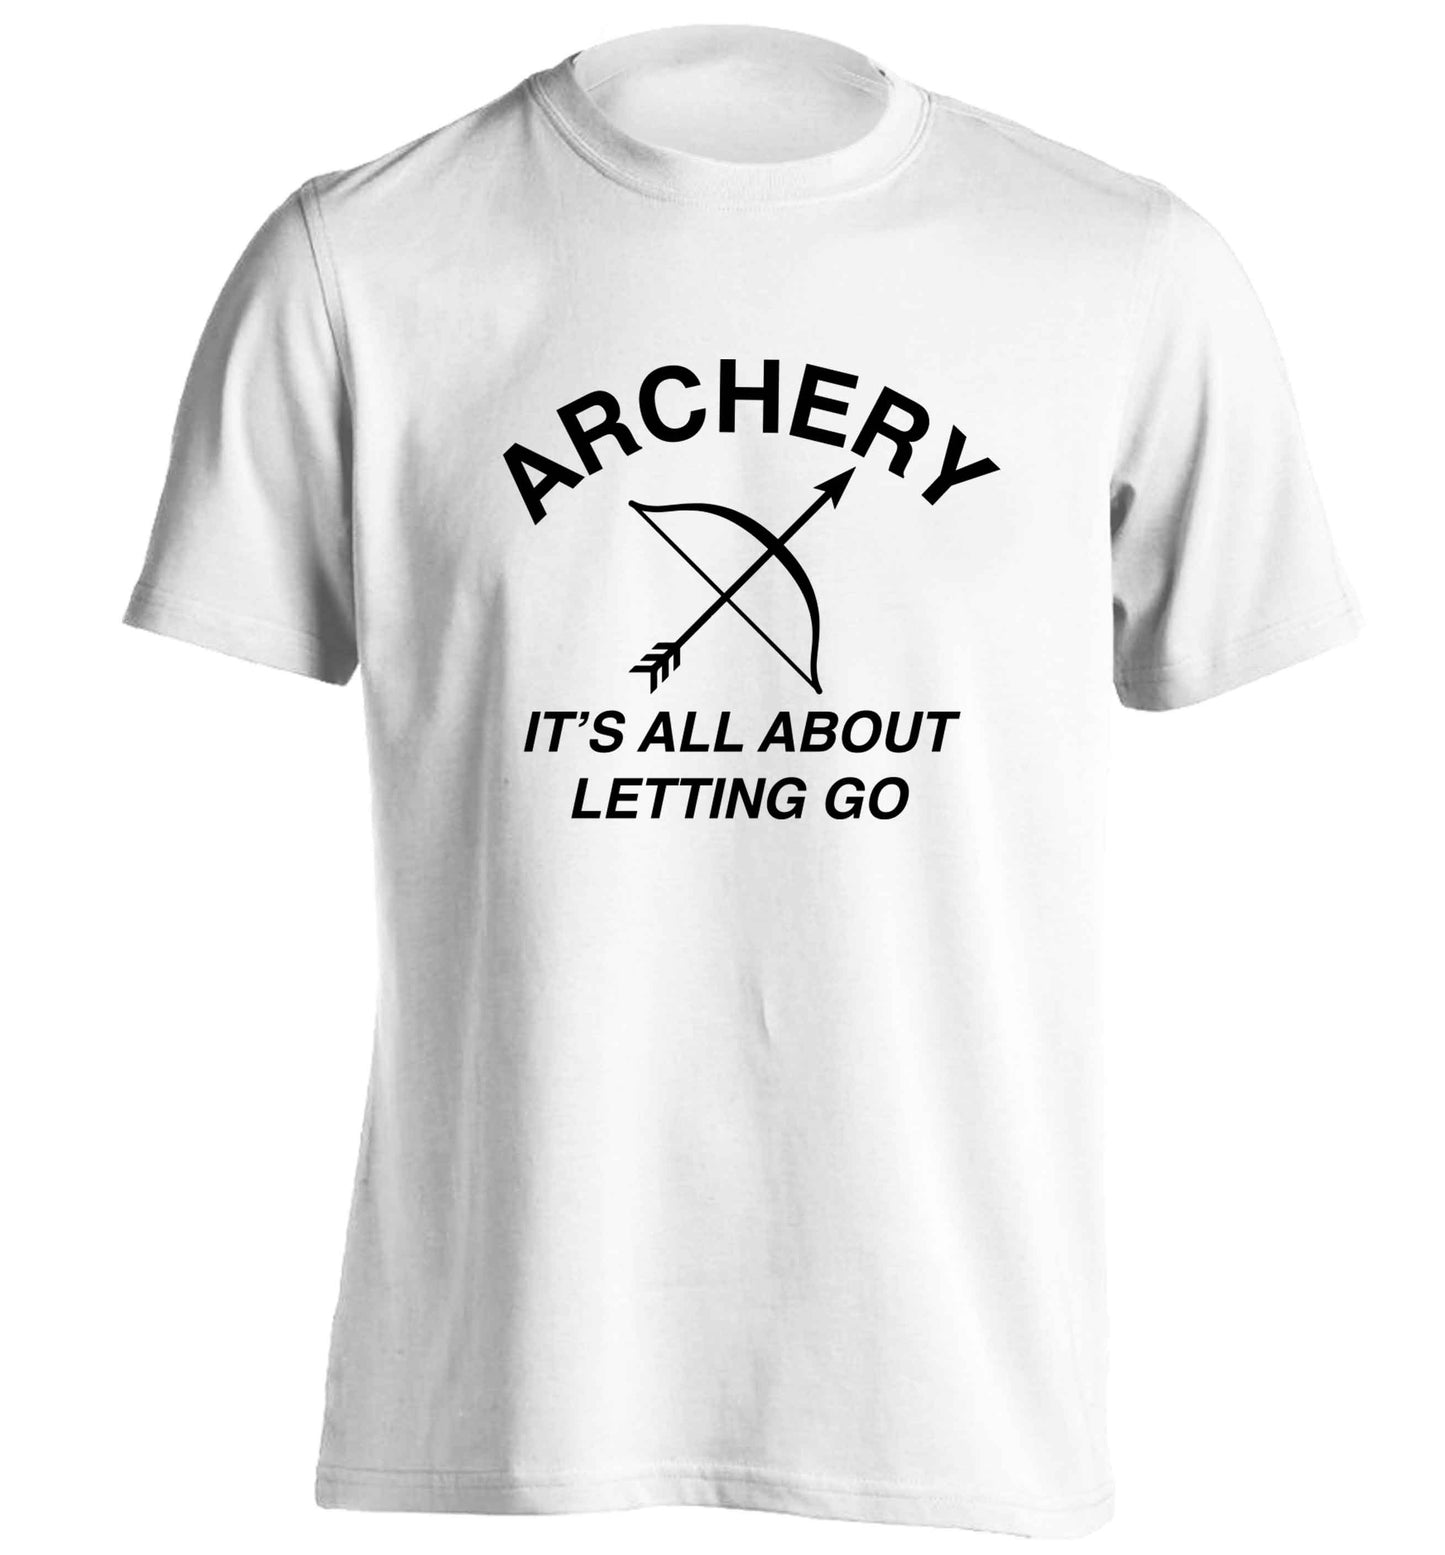 Archery it's all about letting go adults unisex white Tshirt 2XL